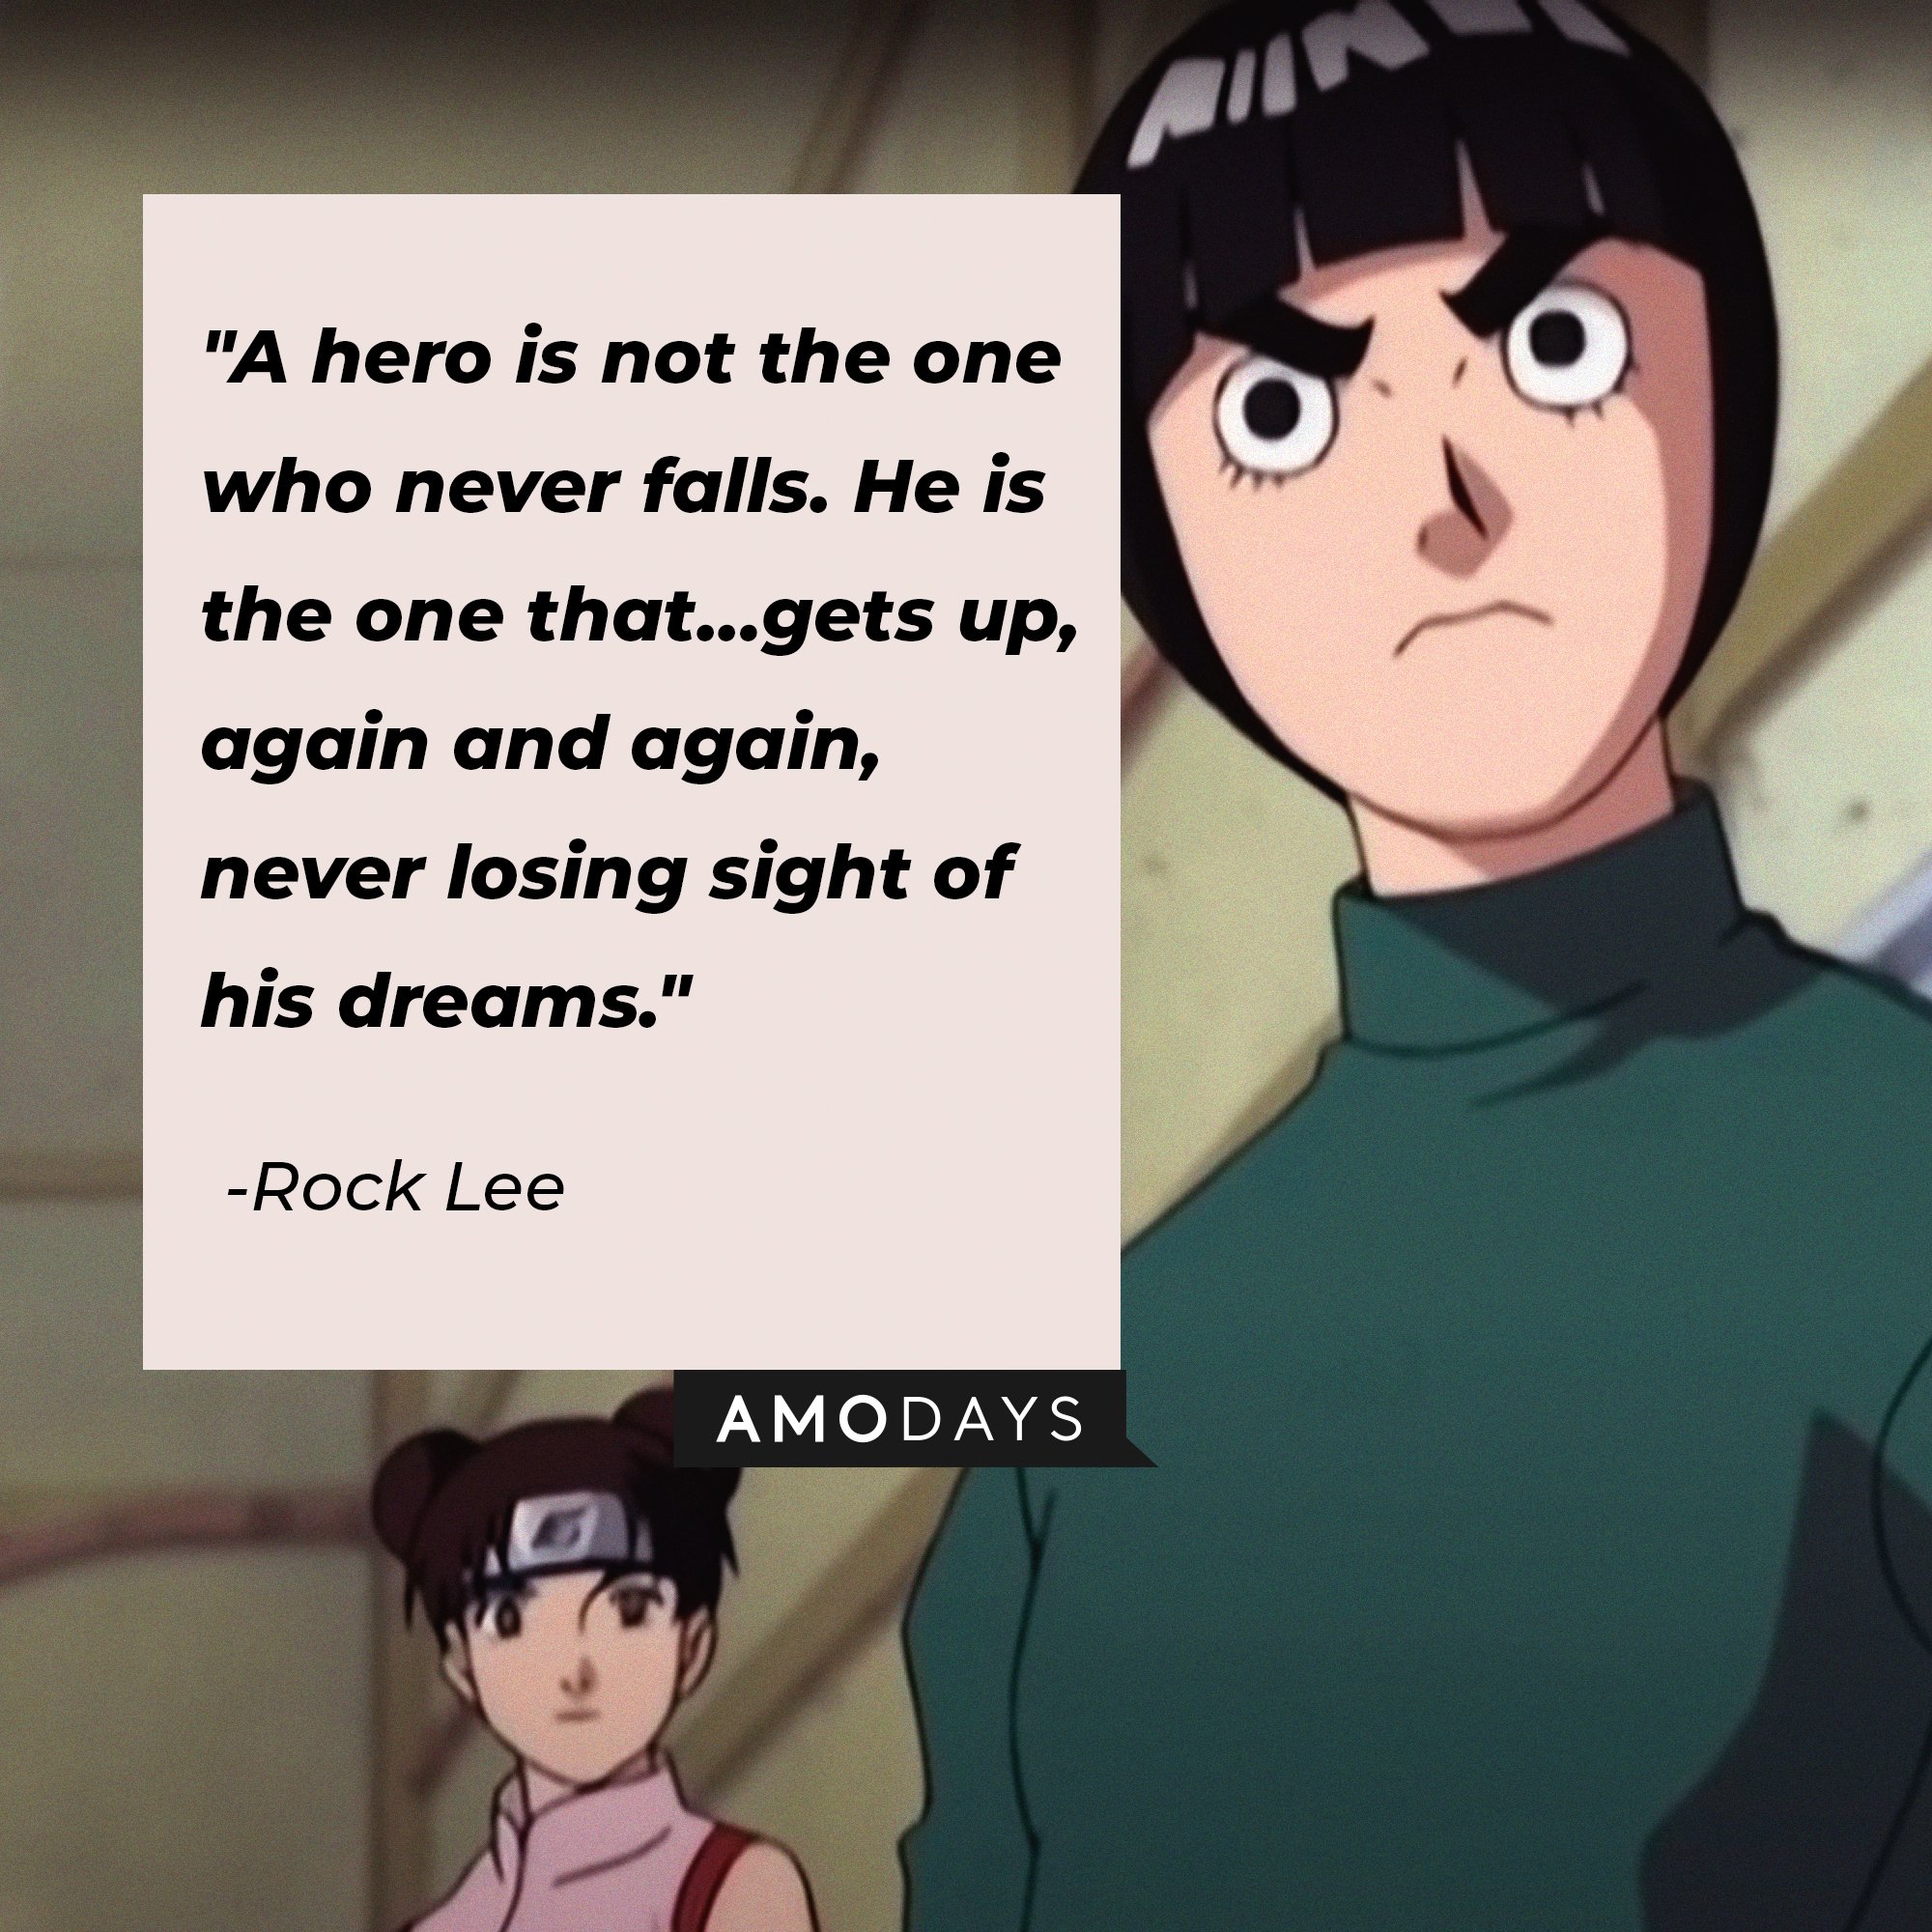 Rock Lee's quote: "A hero is not the one who never falls. He is the one that…gets up, again and again, never losing sight of his dreams." | Image: AmoDays